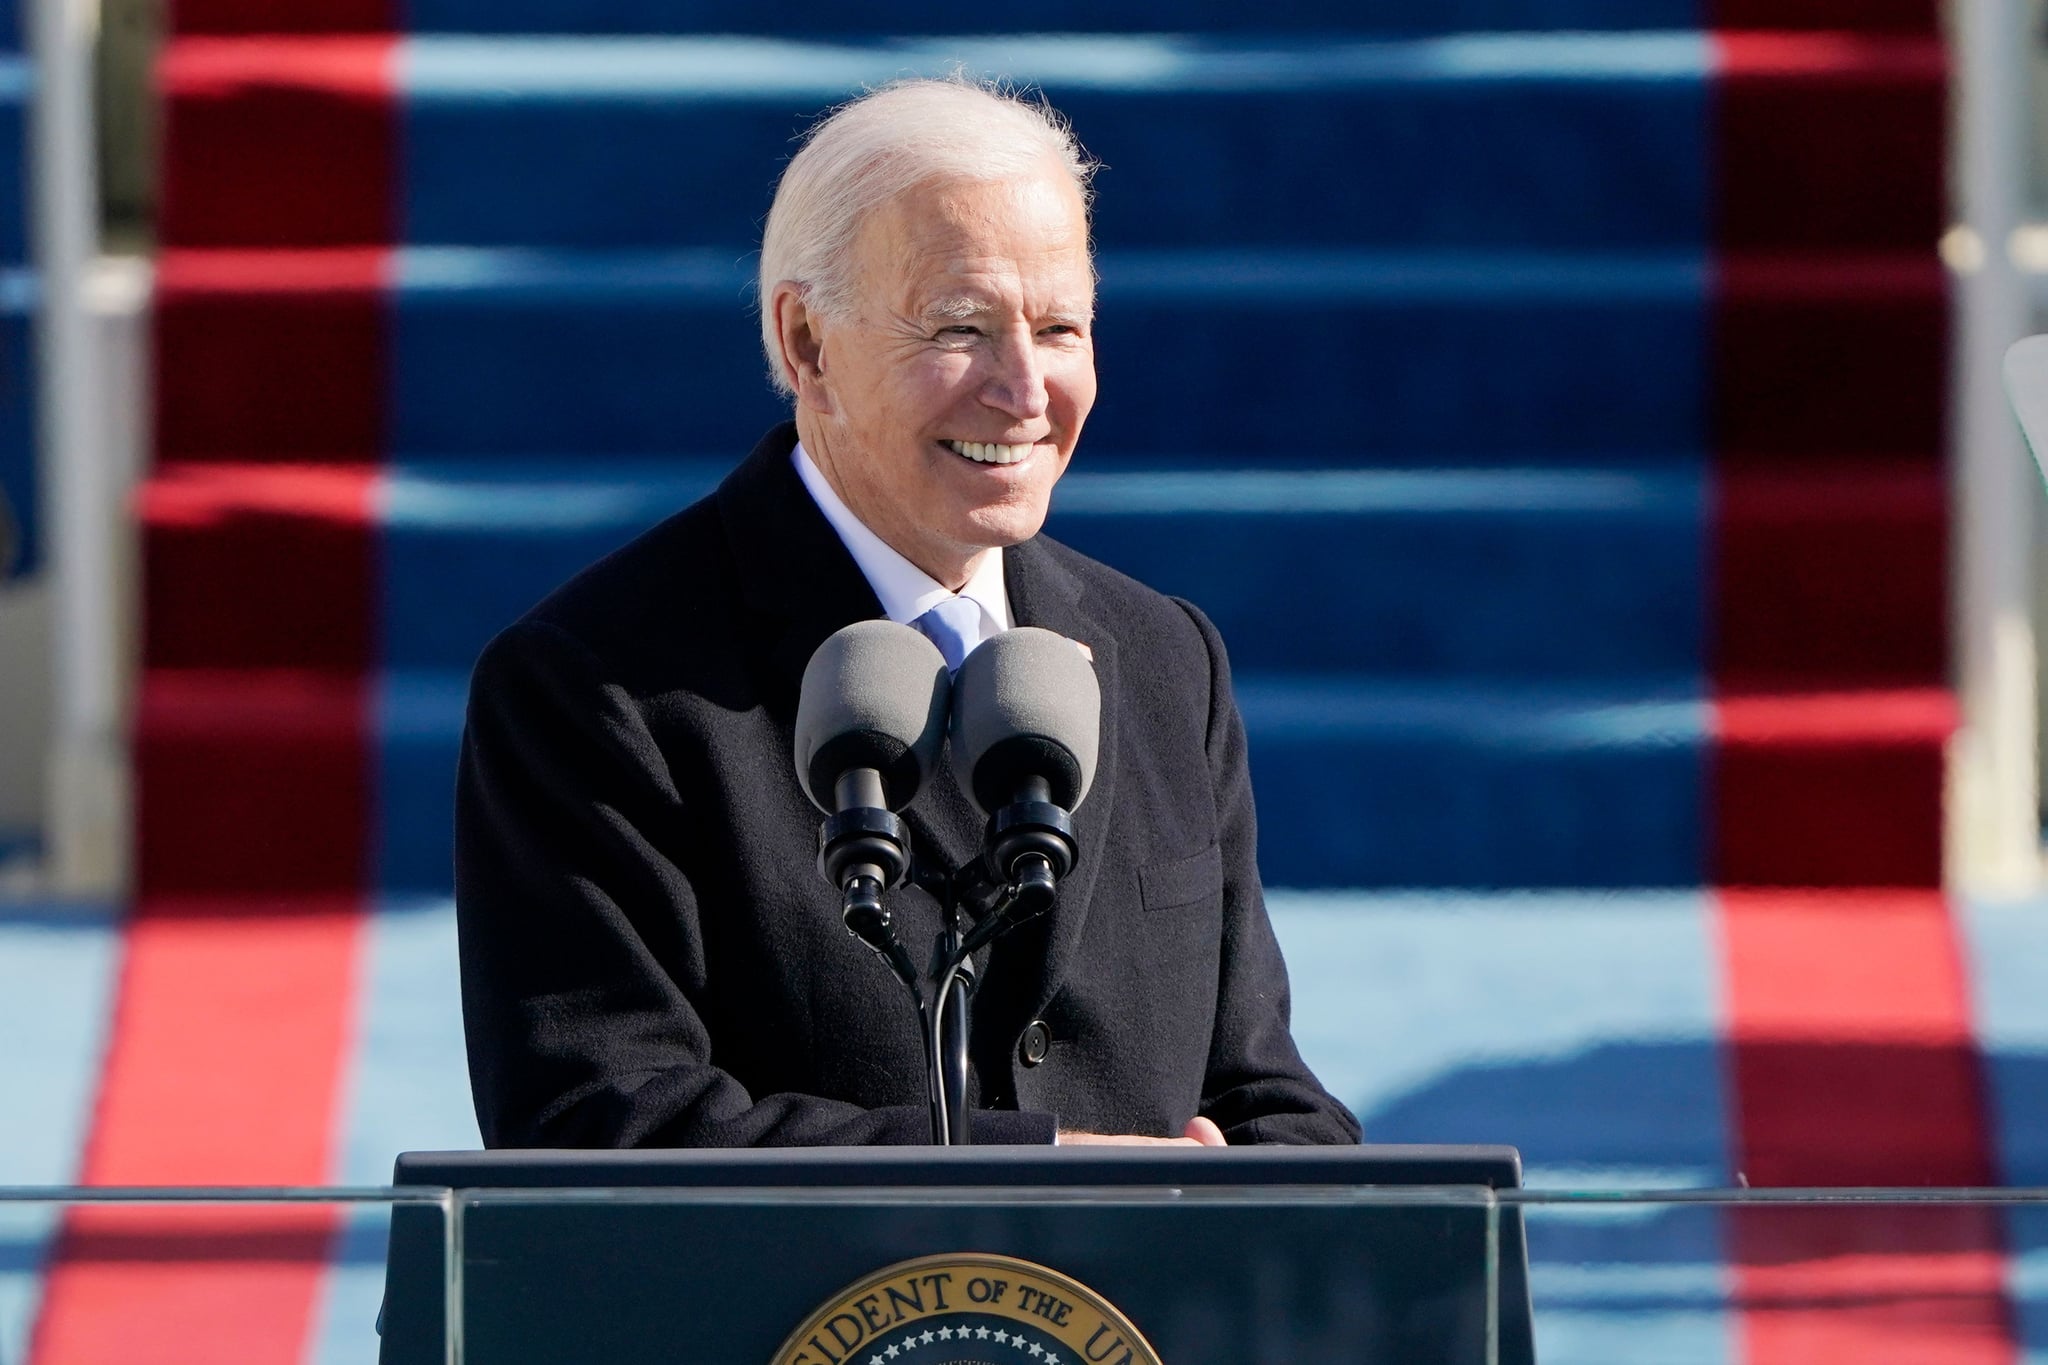 TOPSHOT - US President Joe Biden delivers his Inauguration speech after being sworn in as the 46th US President on January 20, 2021, at the US Capitol in Washington, DC. (Photo by Patrick Semansky / POOL / AFP) (Photo by PATRICK SEMANSKY/POOL/AFP via Getty Images)